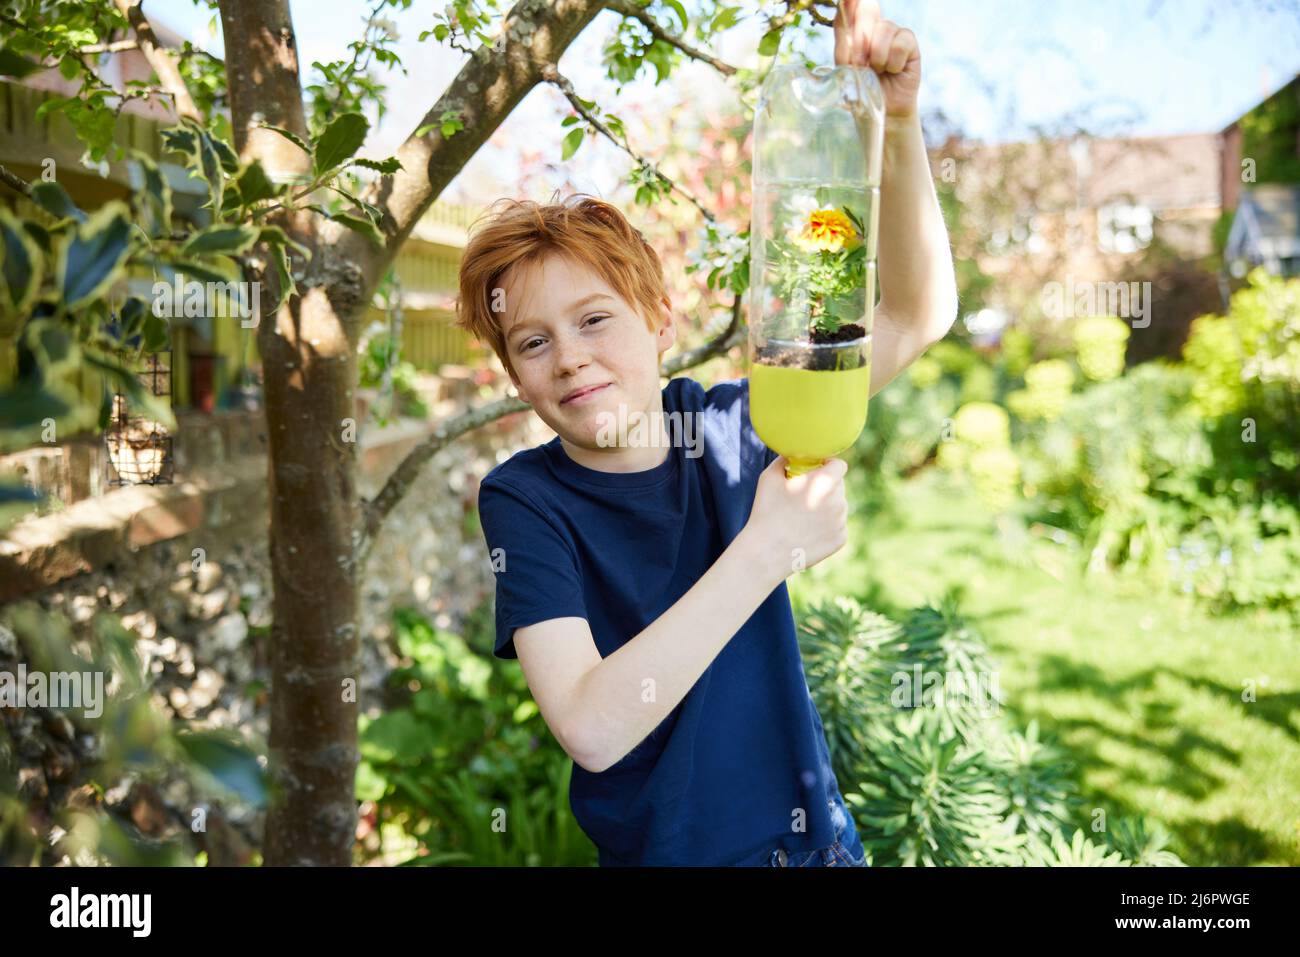 Portrait Of Boy Making Recycled Plant Holder From Plastic Bottle Waste In Garden At Home Stock Photo